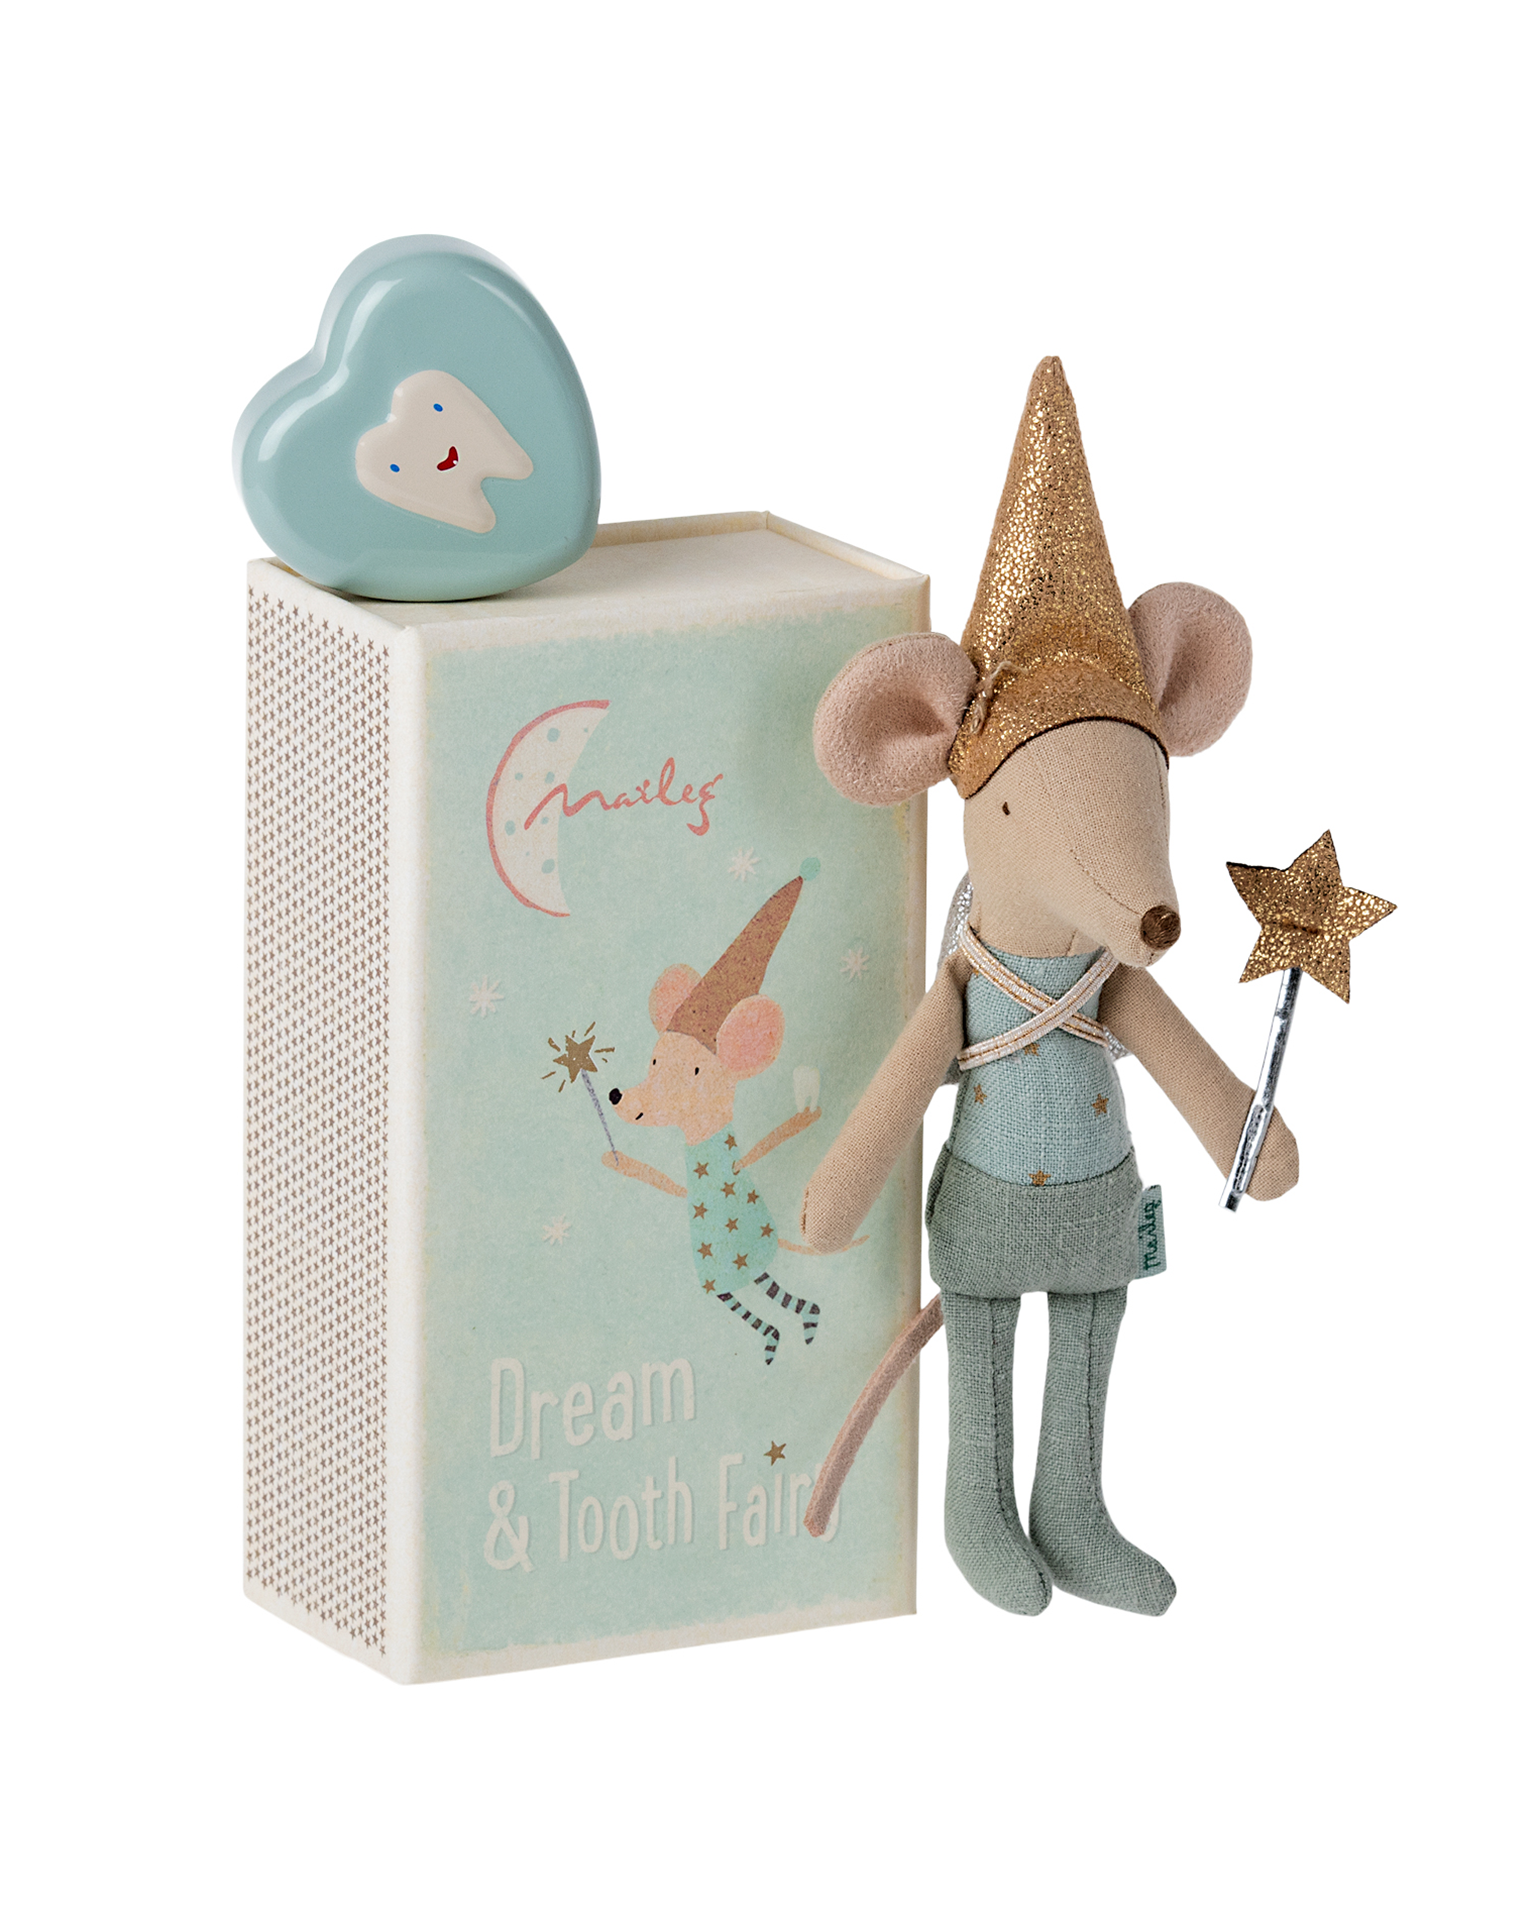 Little maileg play tooth fairy mouse in matchbox in Blue